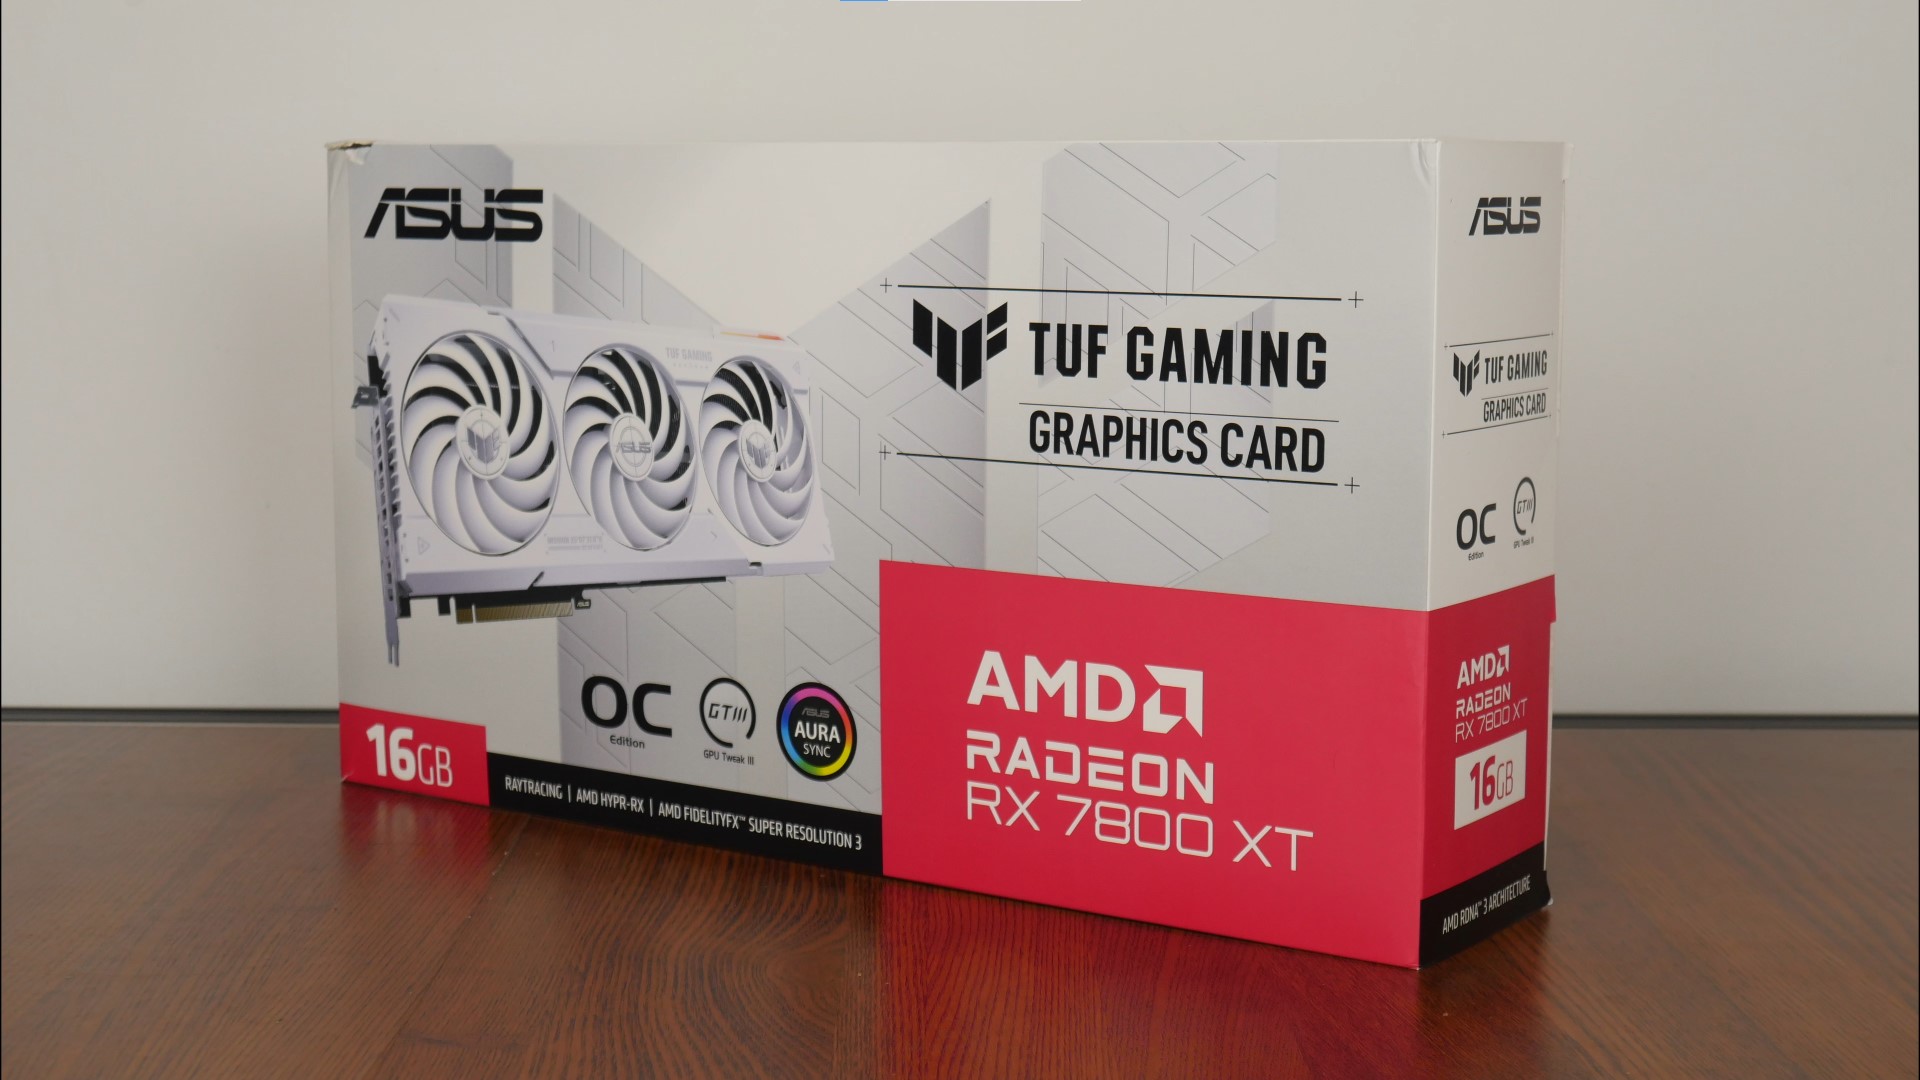 ASUS TUF Gaming Radeon RX 7800 XT White OC Edition 16GB GDDR6 Graphics Card Packaging (Front)